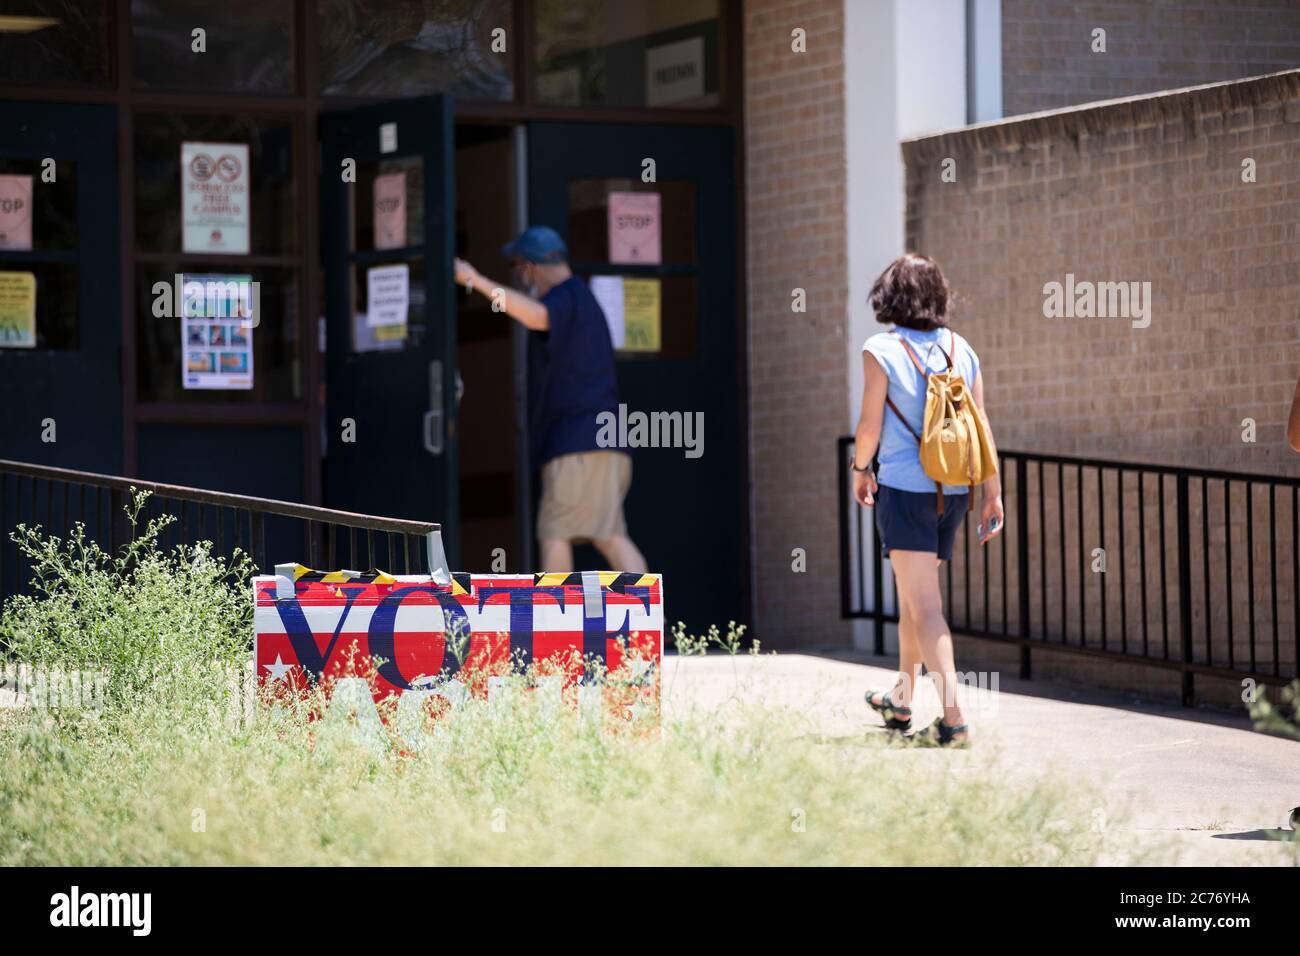 Austin, TX USA July 14, 2020: Masked voters enter polling places in south Austin for the primary runoff election to determine matchups for the November general elections. Heavy by runoff standards, in-person voting is expected to still be less than 10% of registered Texas voters. Credit: Bob Daemmrich/Alamy Live News Stock Photo